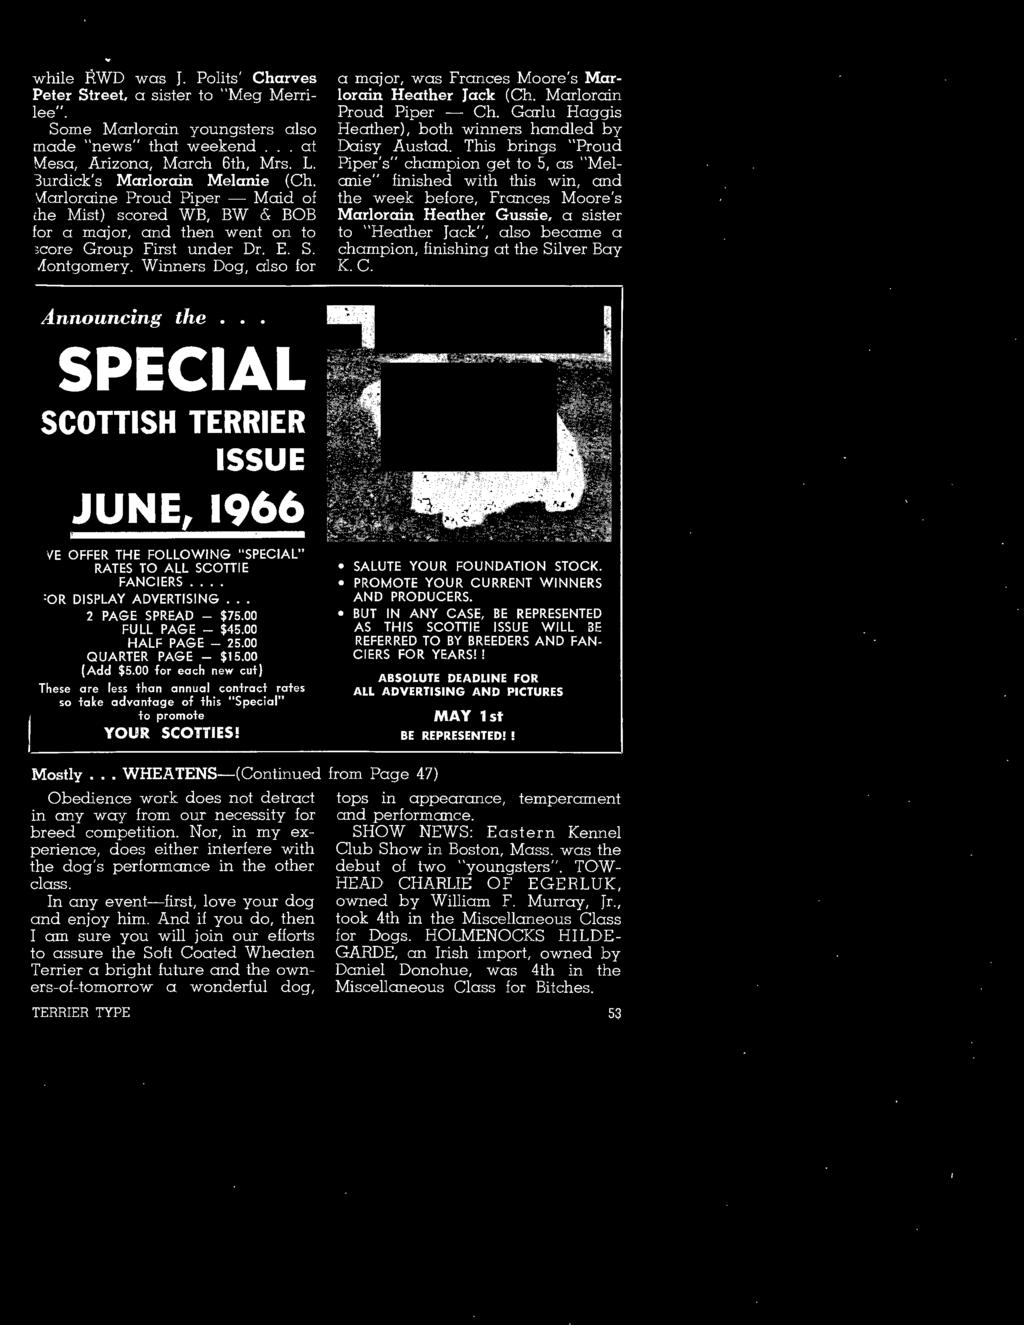 Winners Dog, also for Announcing the... SPECIAL SCOTTISH TERRIER ISSUE JUNE, 1966 VE OFFER THE FOLLOWING "SPECIAL" RATES TO ALL SCOTTIE FANCIERS... :or DISPLAY ADVERTISING... 2 PAGE SPREAD - $75.